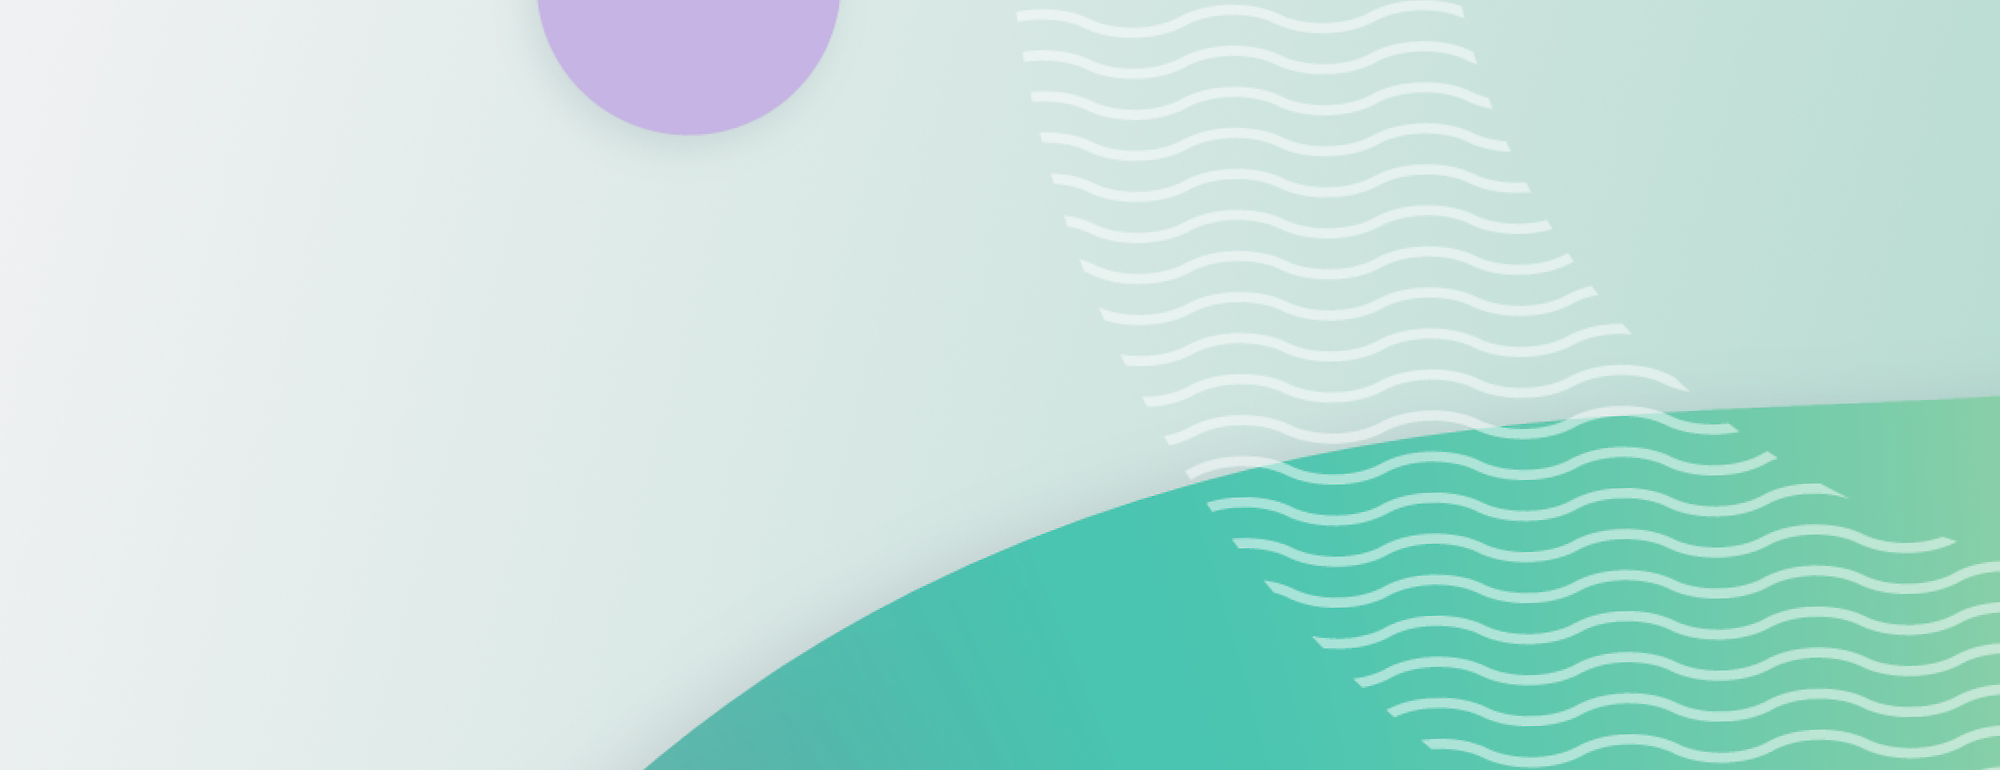 Abstract design featuring a gradient green wave pattern with white wavy lines and a solid purple circle on a light background.